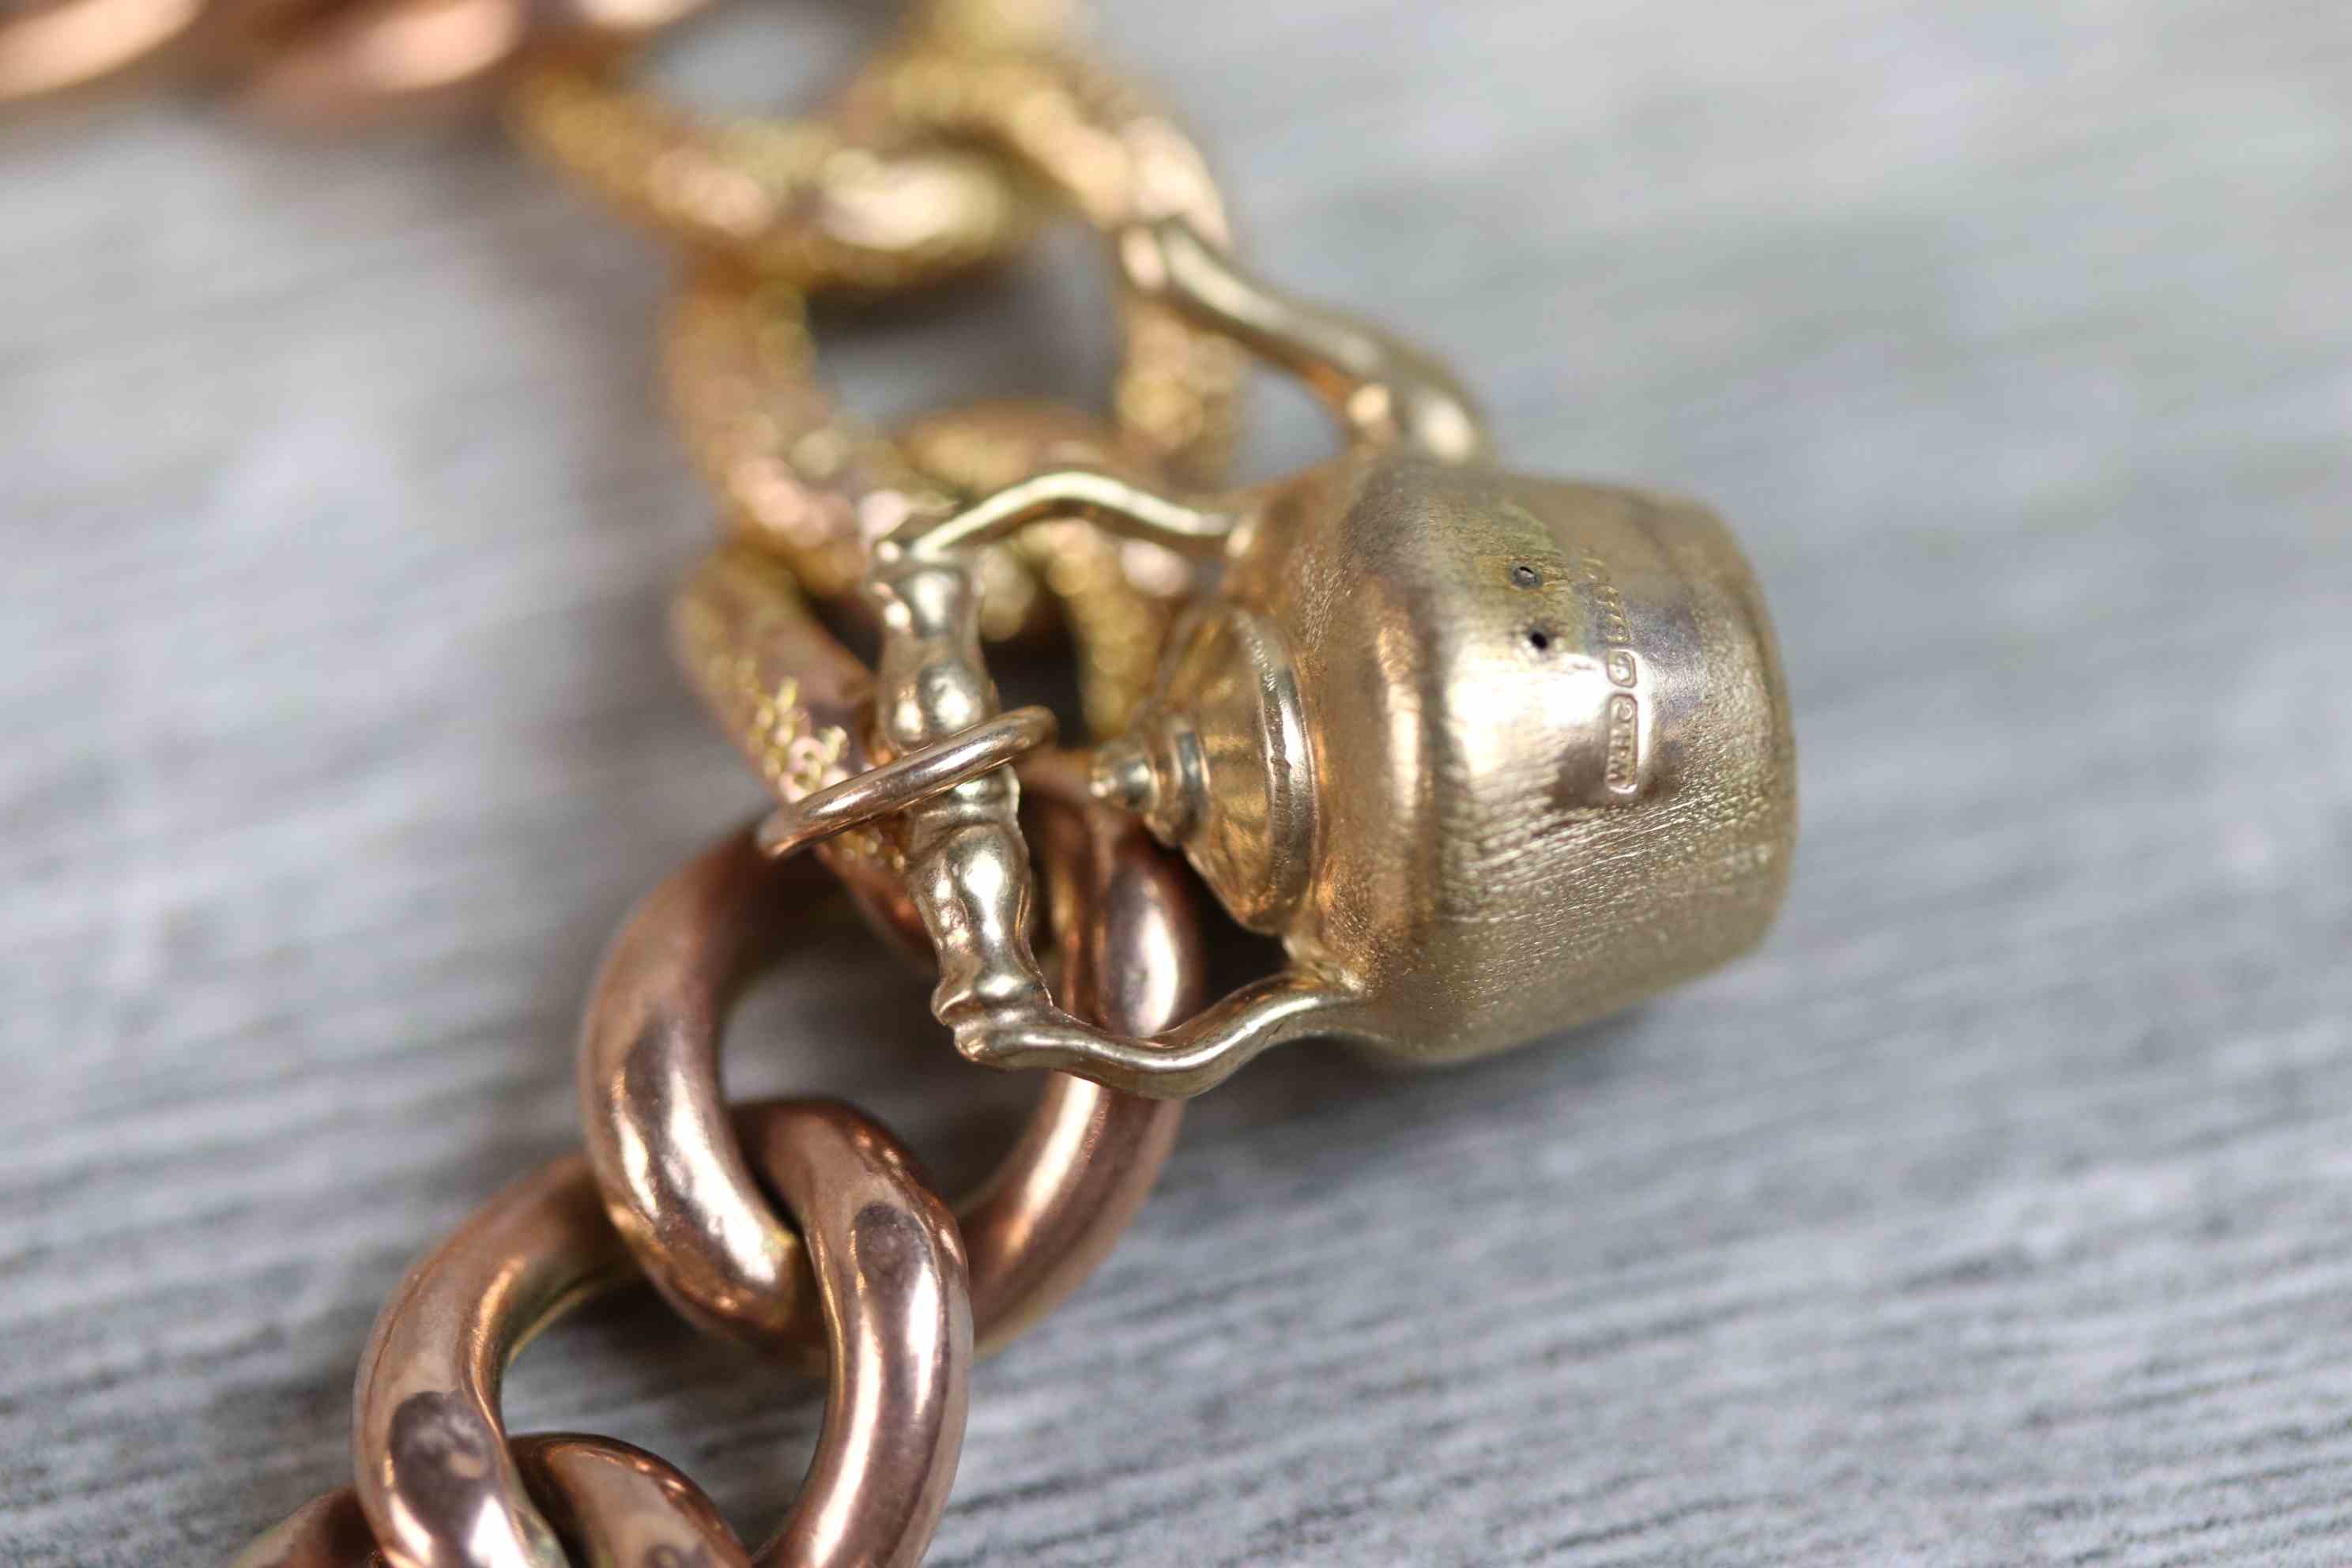 9ct rose gold curb link charm bracelet with 9ct rose gold padlock clasp, seven 9ct gold and yellow - Image 9 of 10